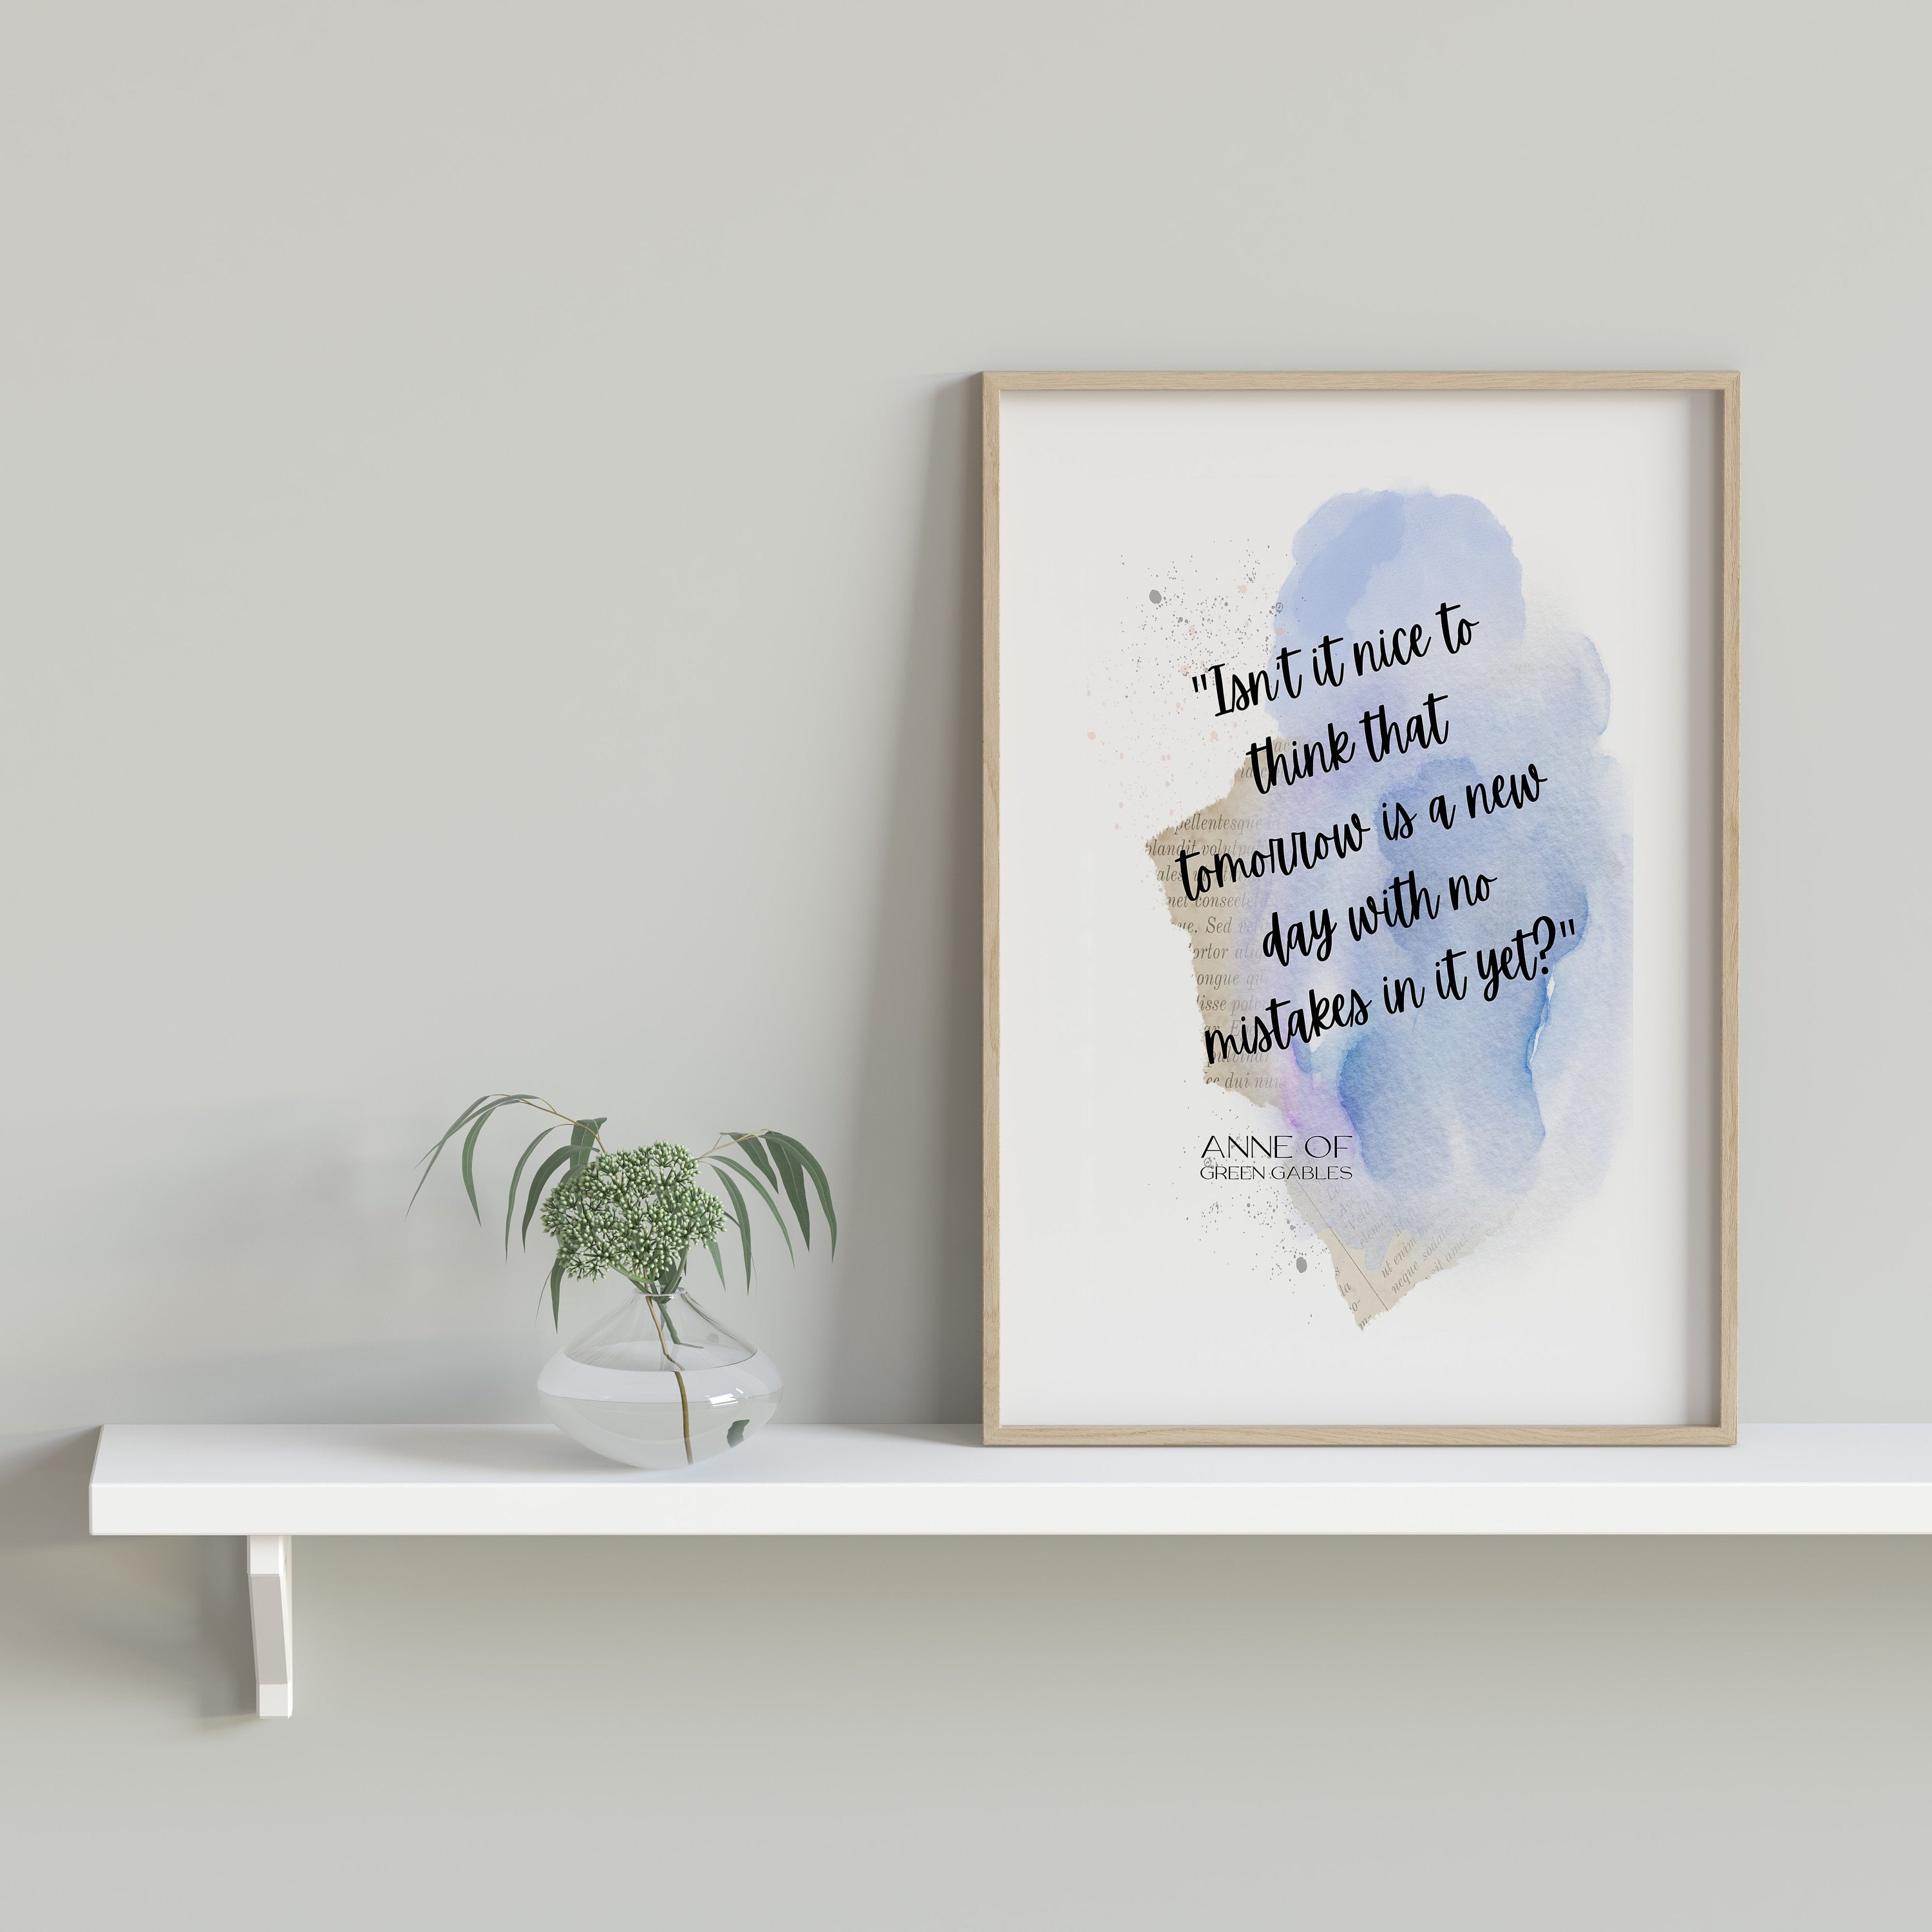 Anne of Green Gables Quote Print LM Montgomery, Tomorrow is a New Day With No Mistakes Inspirational Quote Wall Art Prints Framed / Unframed